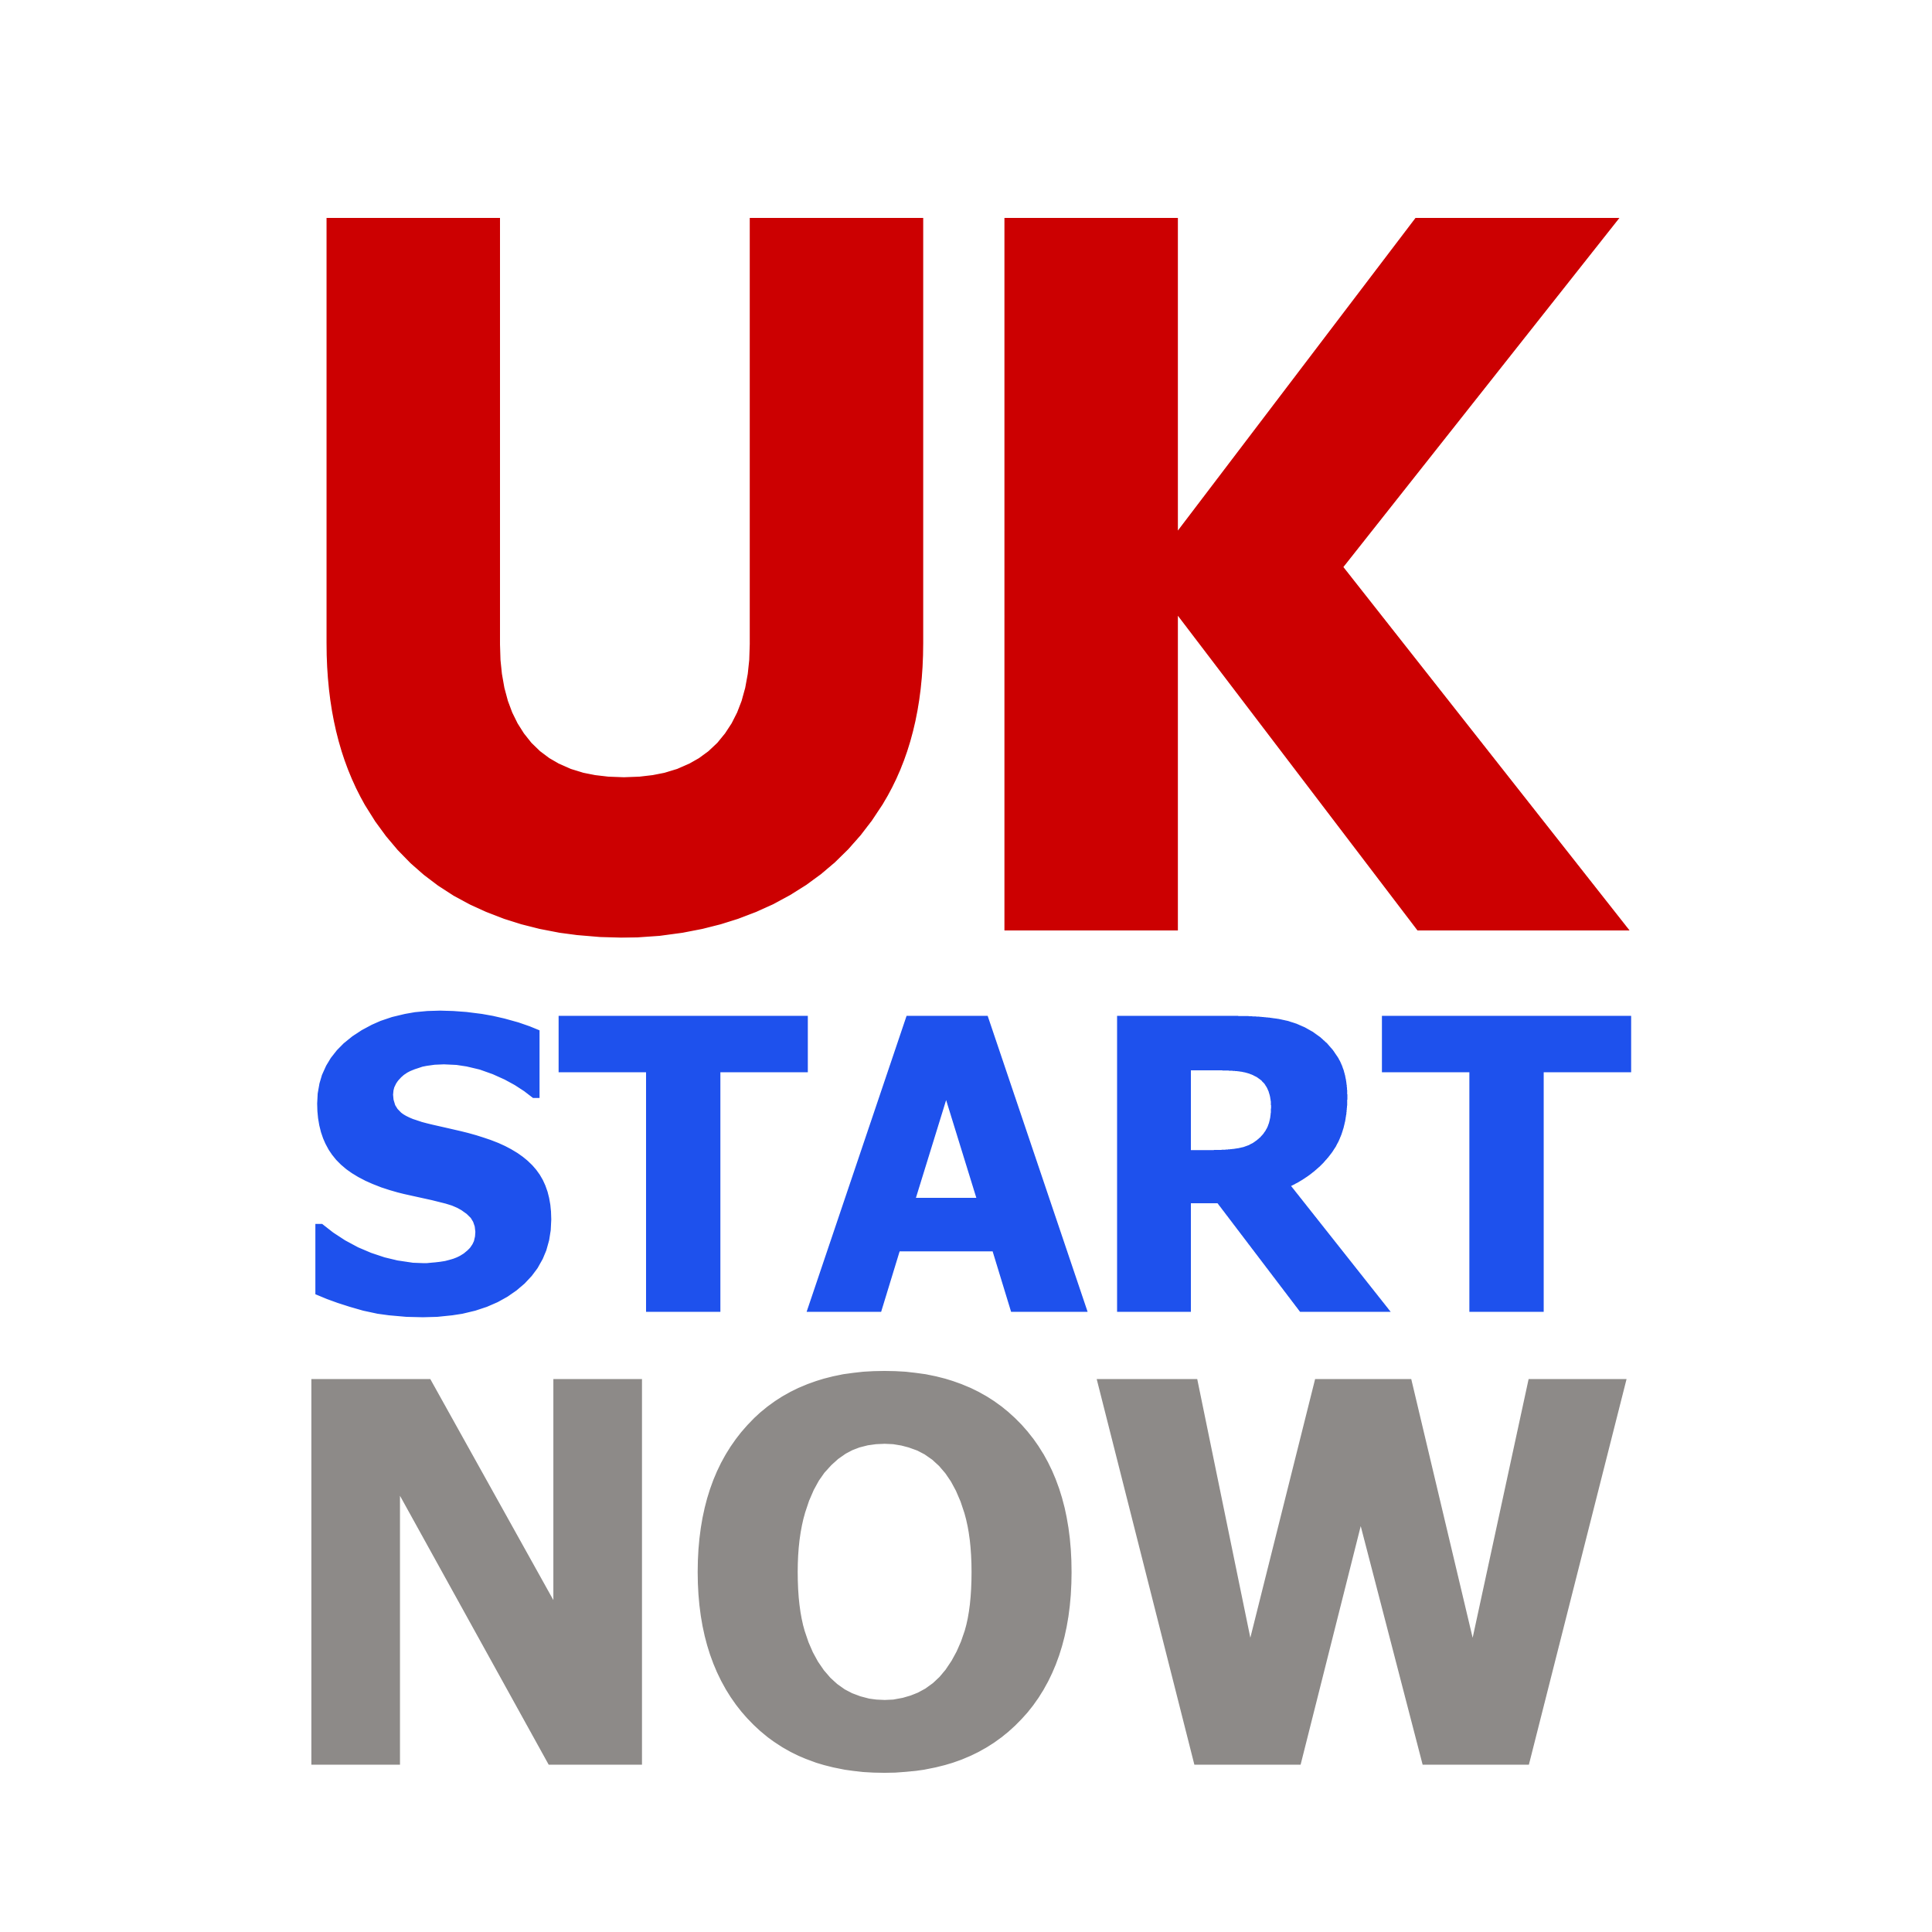 The vertical version of the official UK Start Now logo.